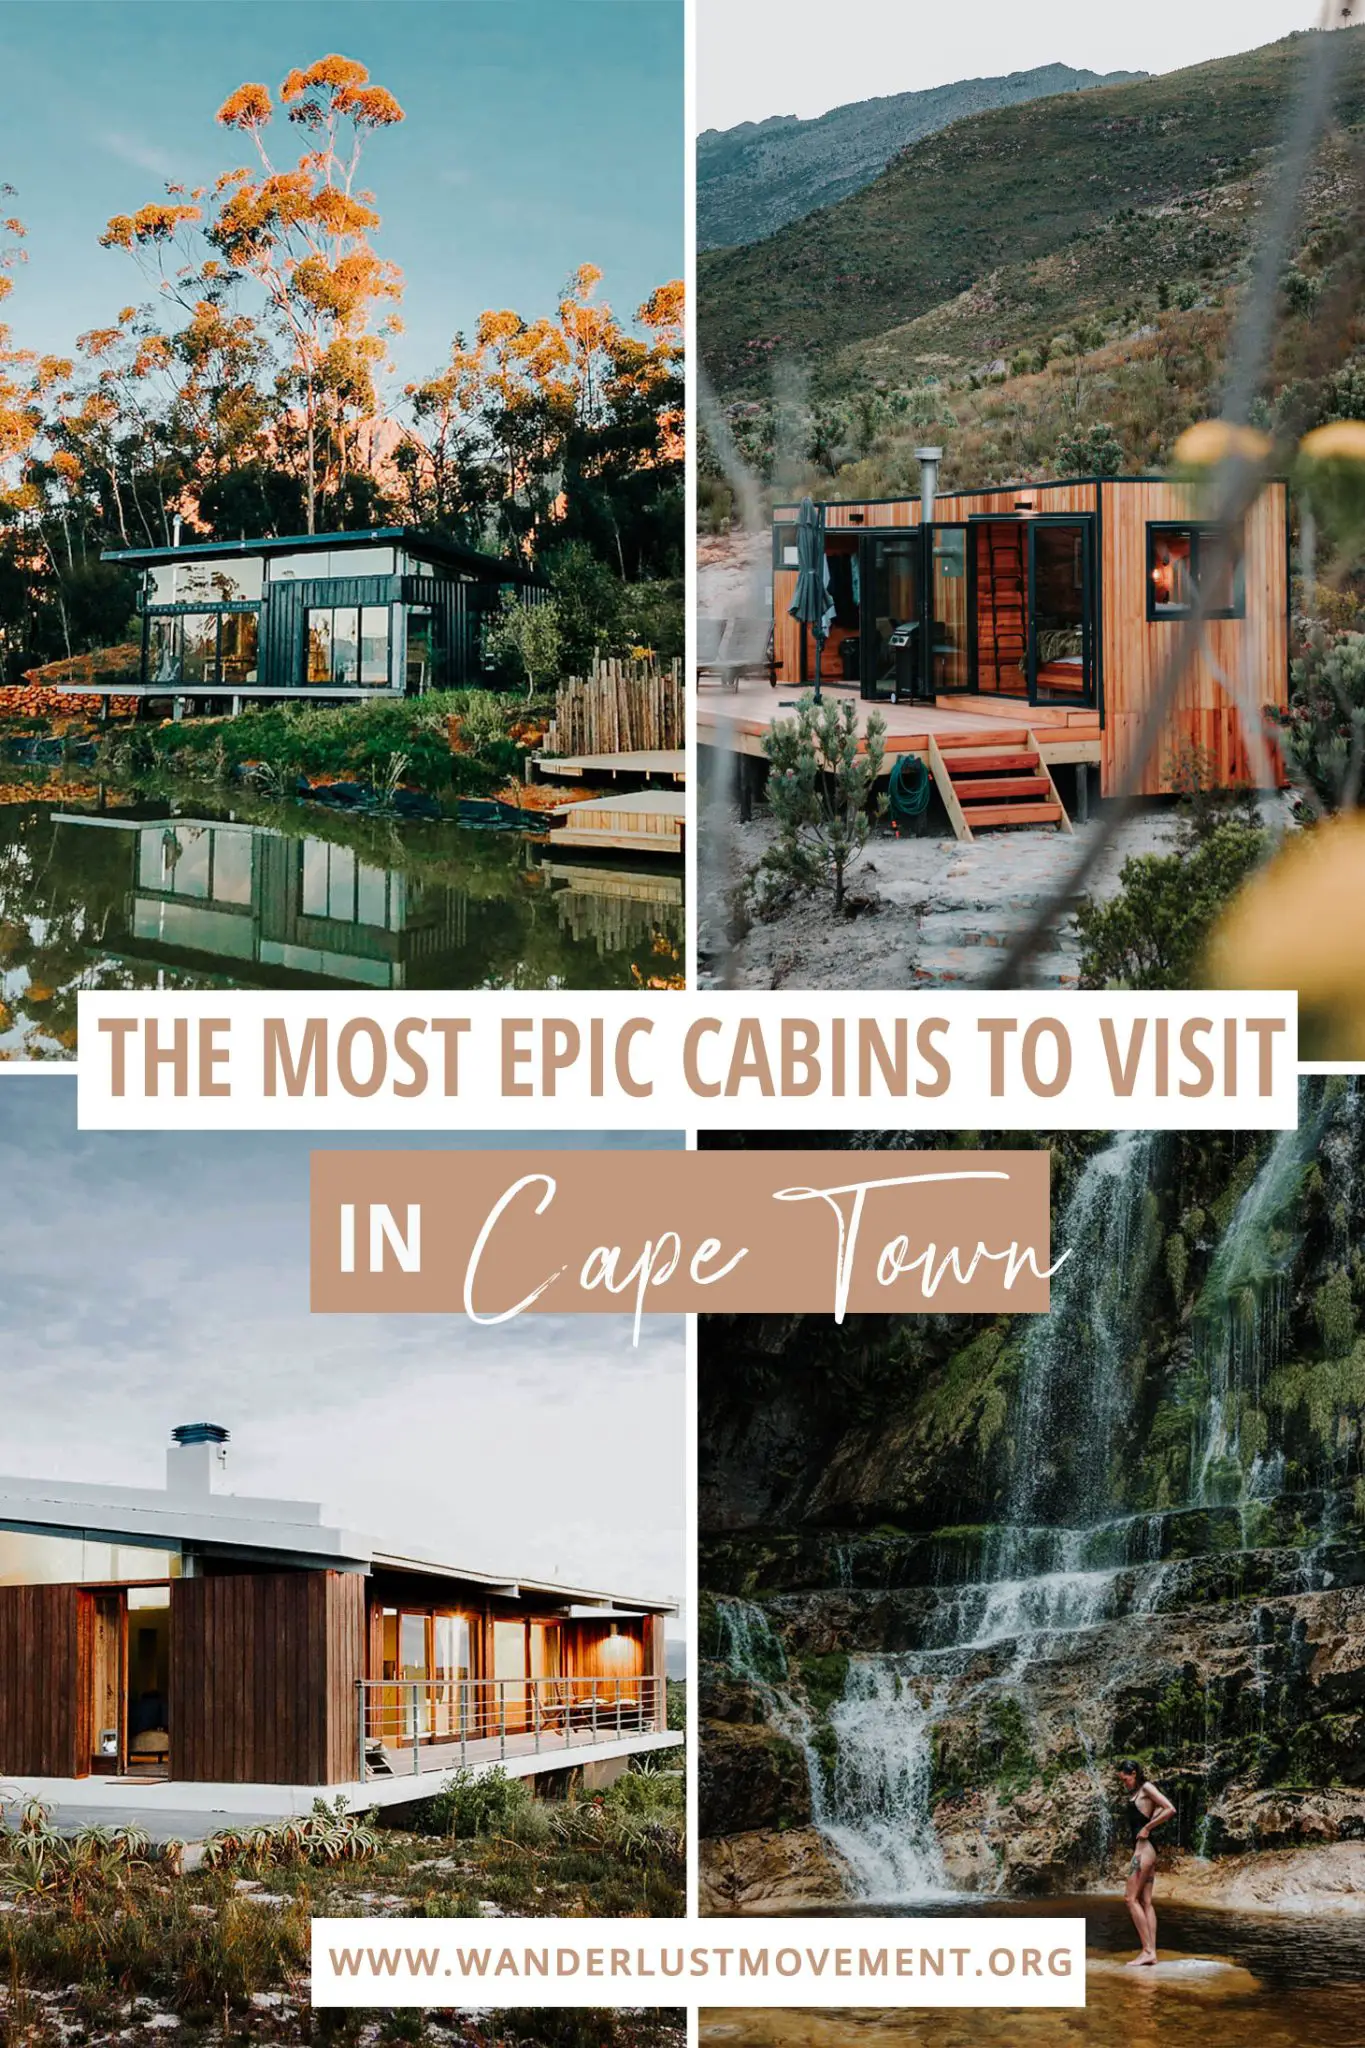 12 Secluded Cabins Near Cape Town That Are Perfect for Escaping Reality